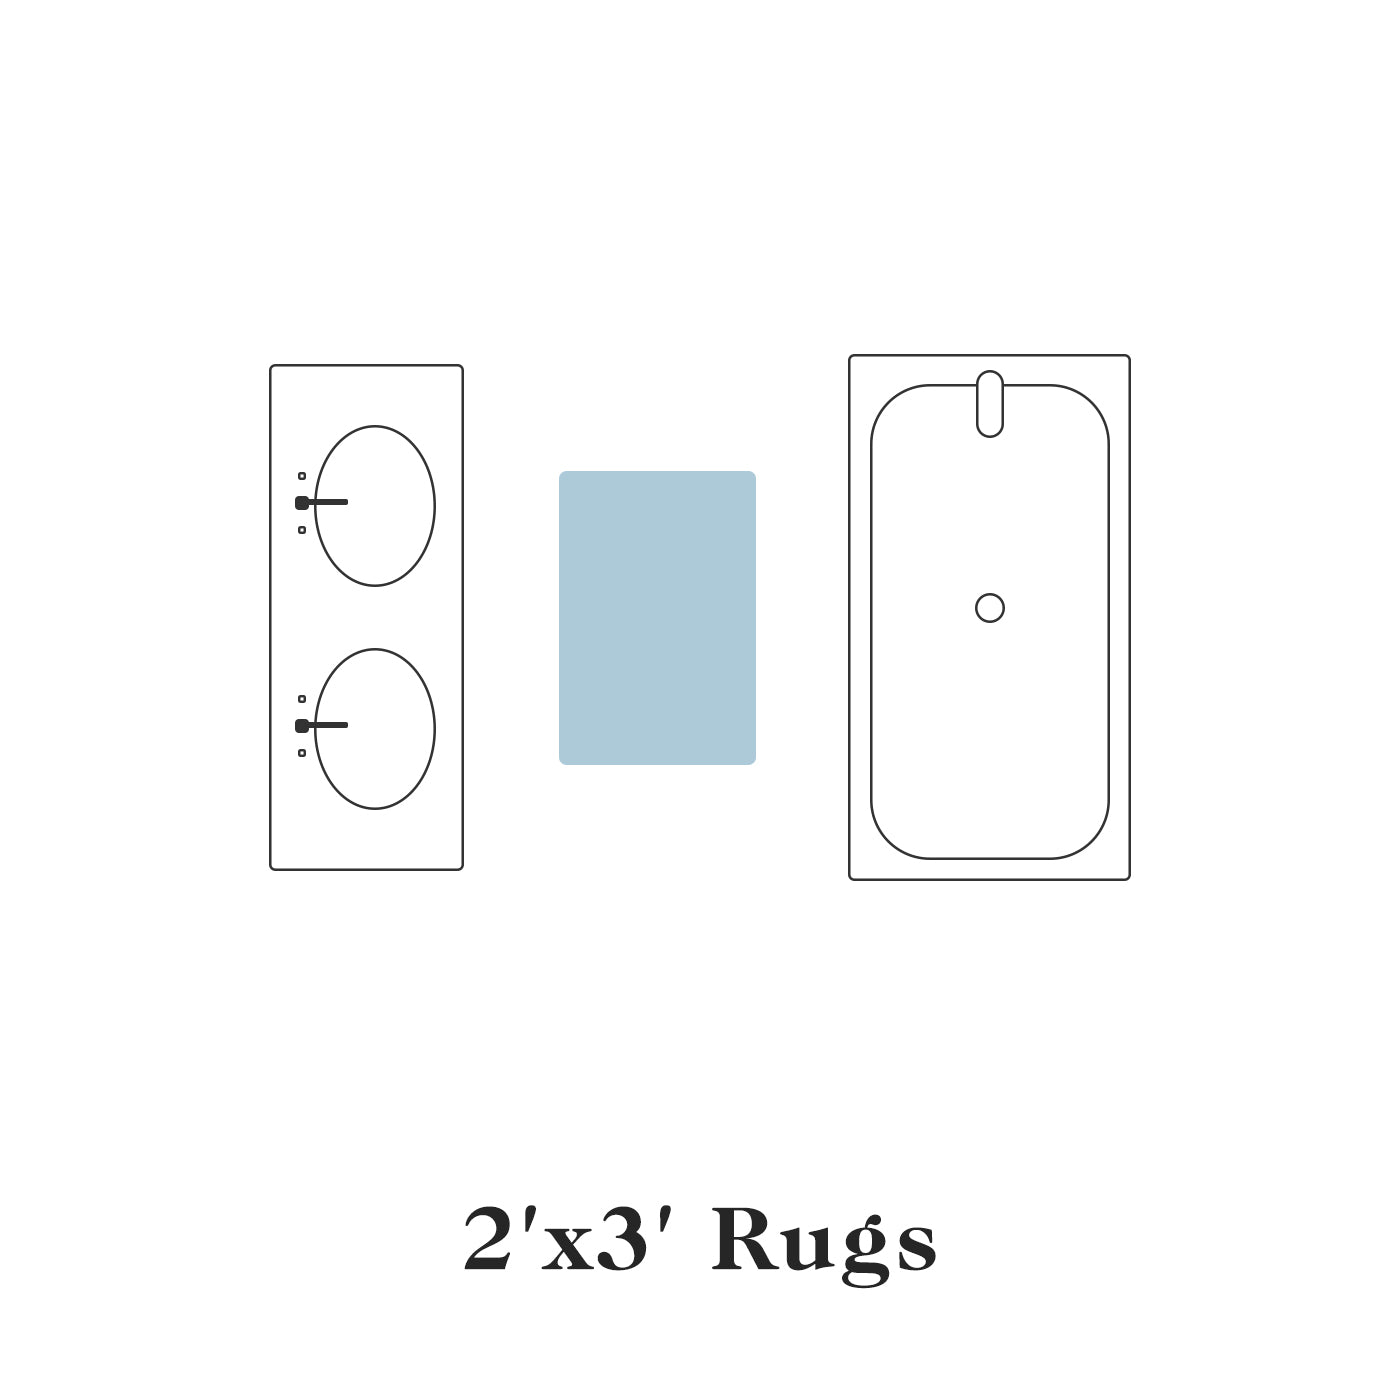 Rug Size Guide, Guide to Choose the Best Rug